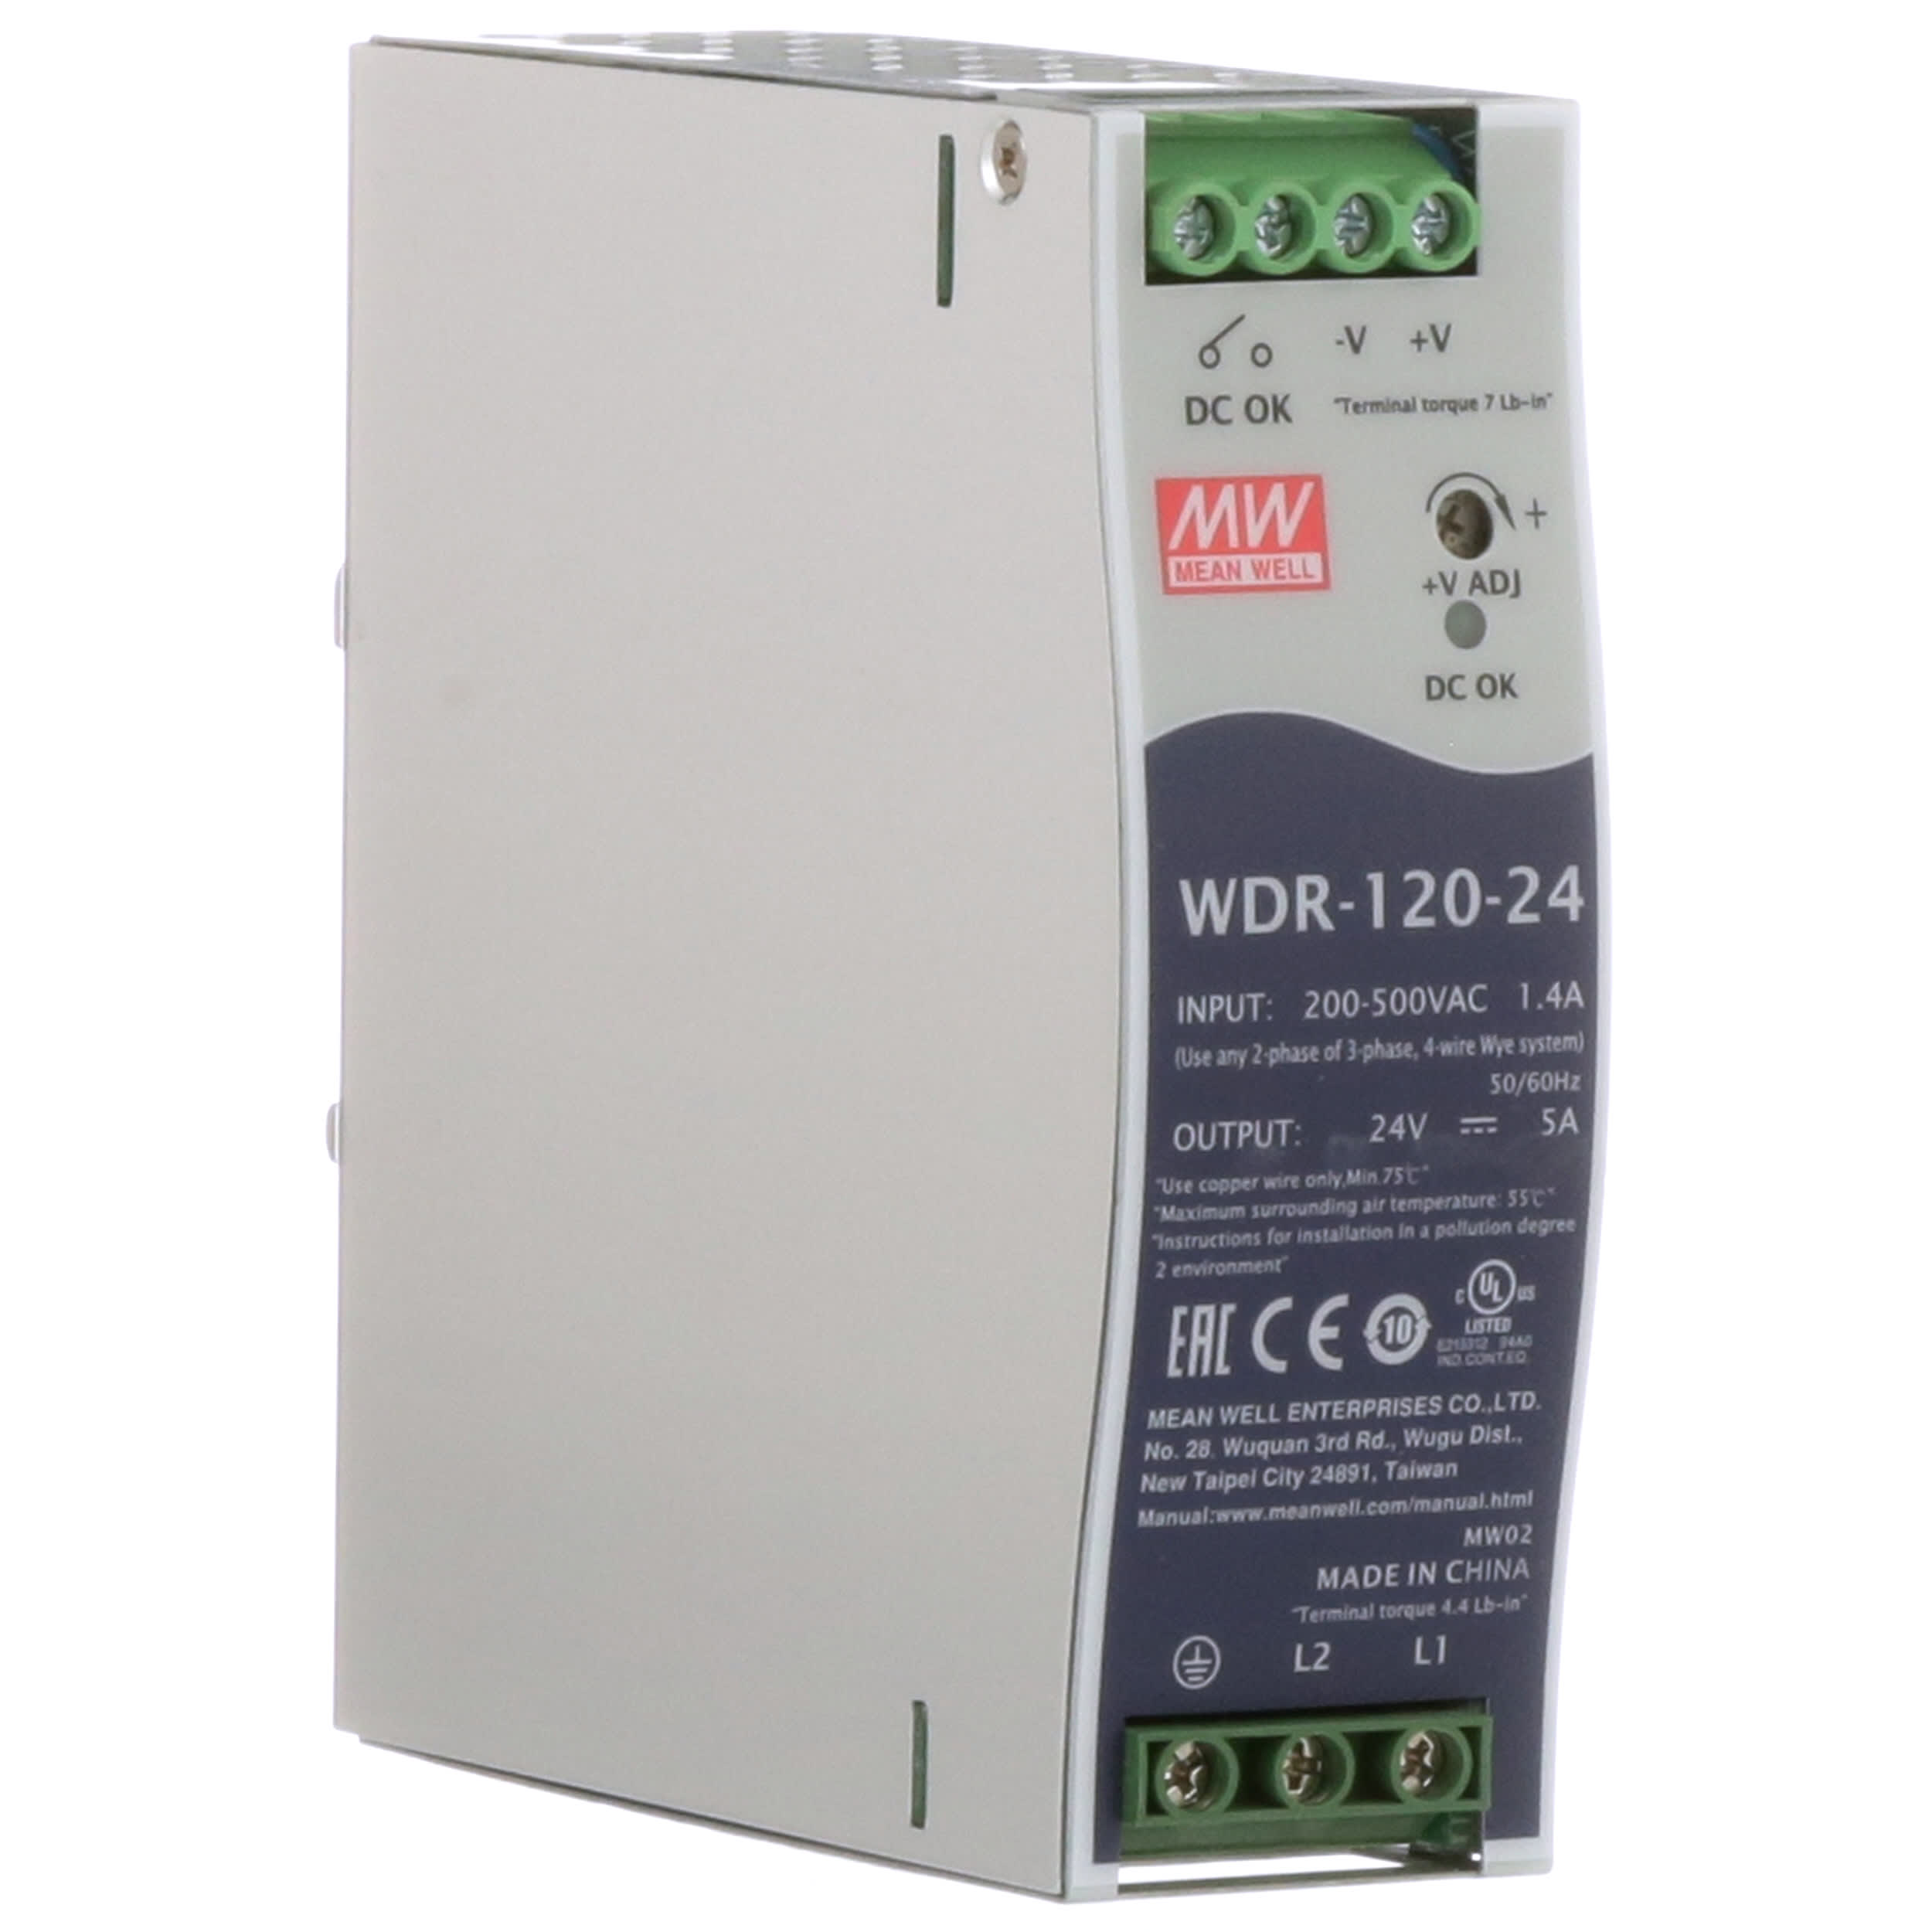 Mean Well WDR-120-24 AC/DC Power Supply Input 200-500v Output 24Vdc 5A 120W 